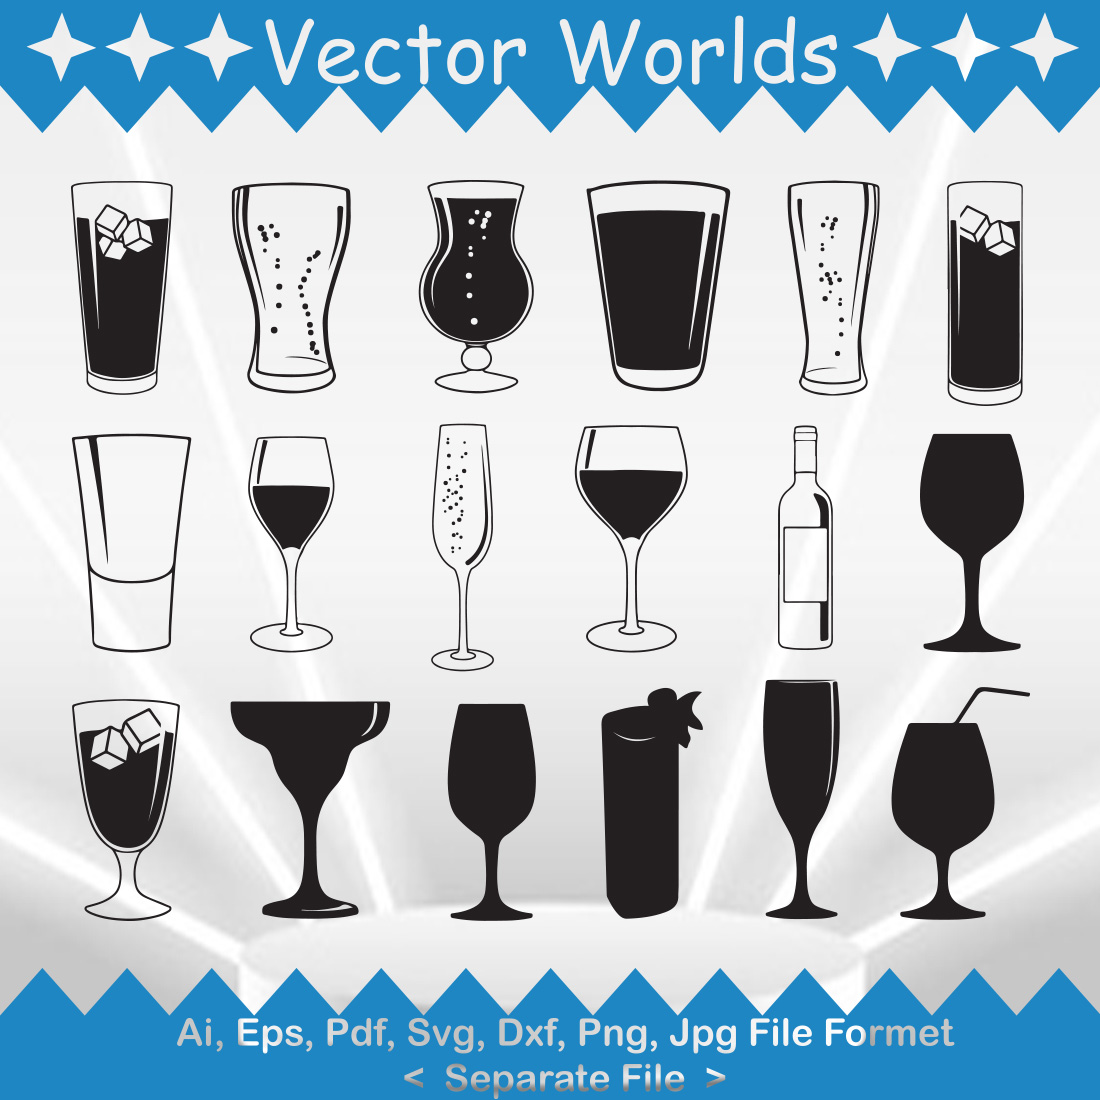 A collection of gorgeous drink glass silhouette images